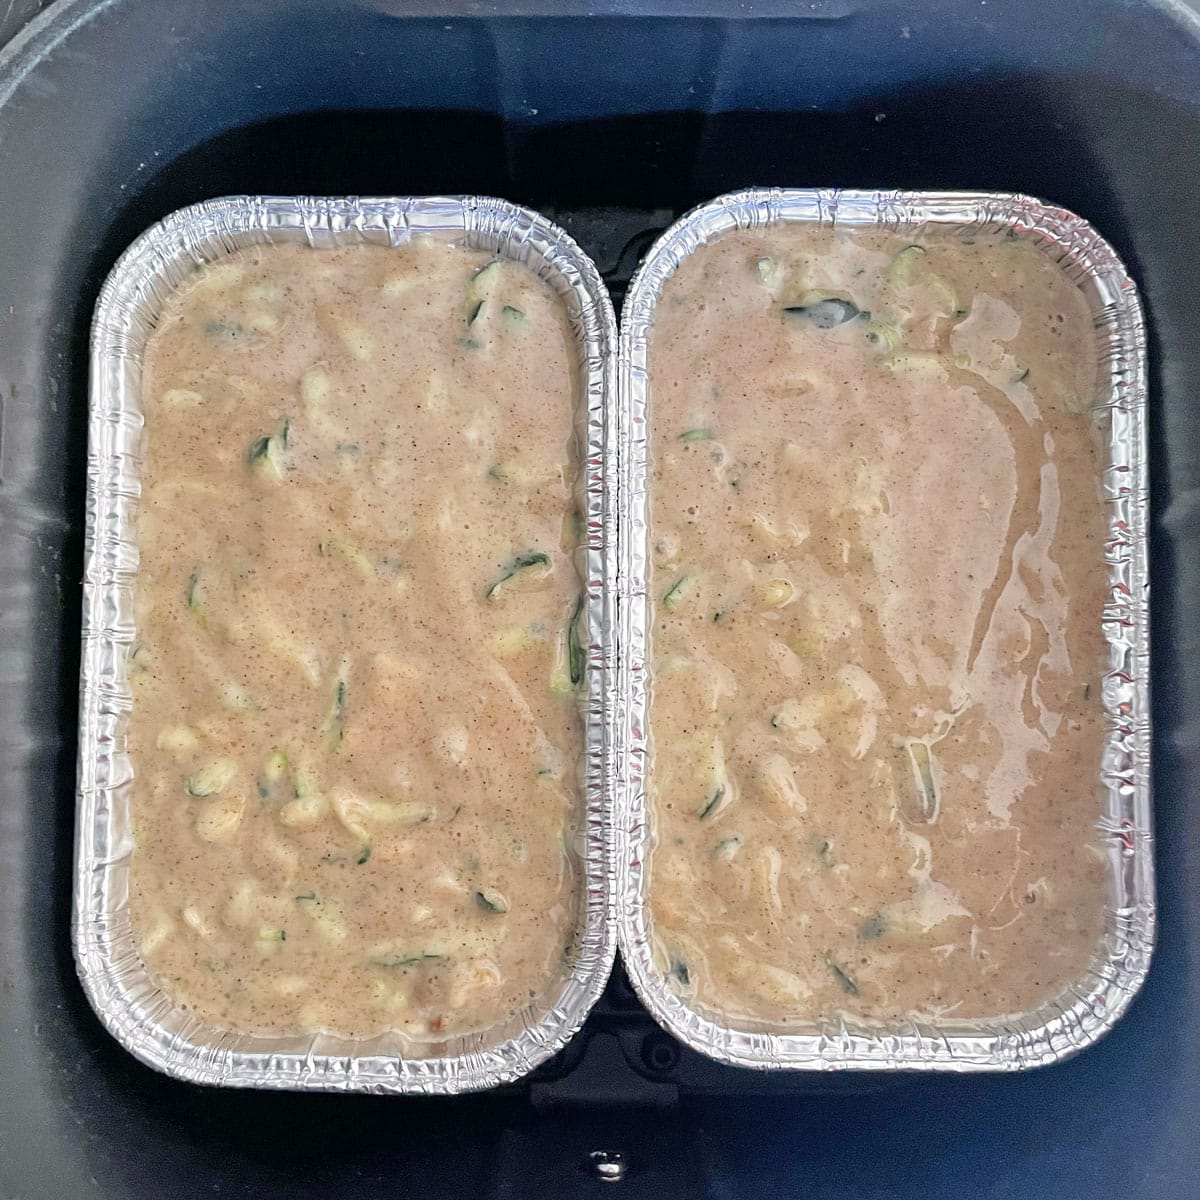 Zucchini bread batter in loaf pans.